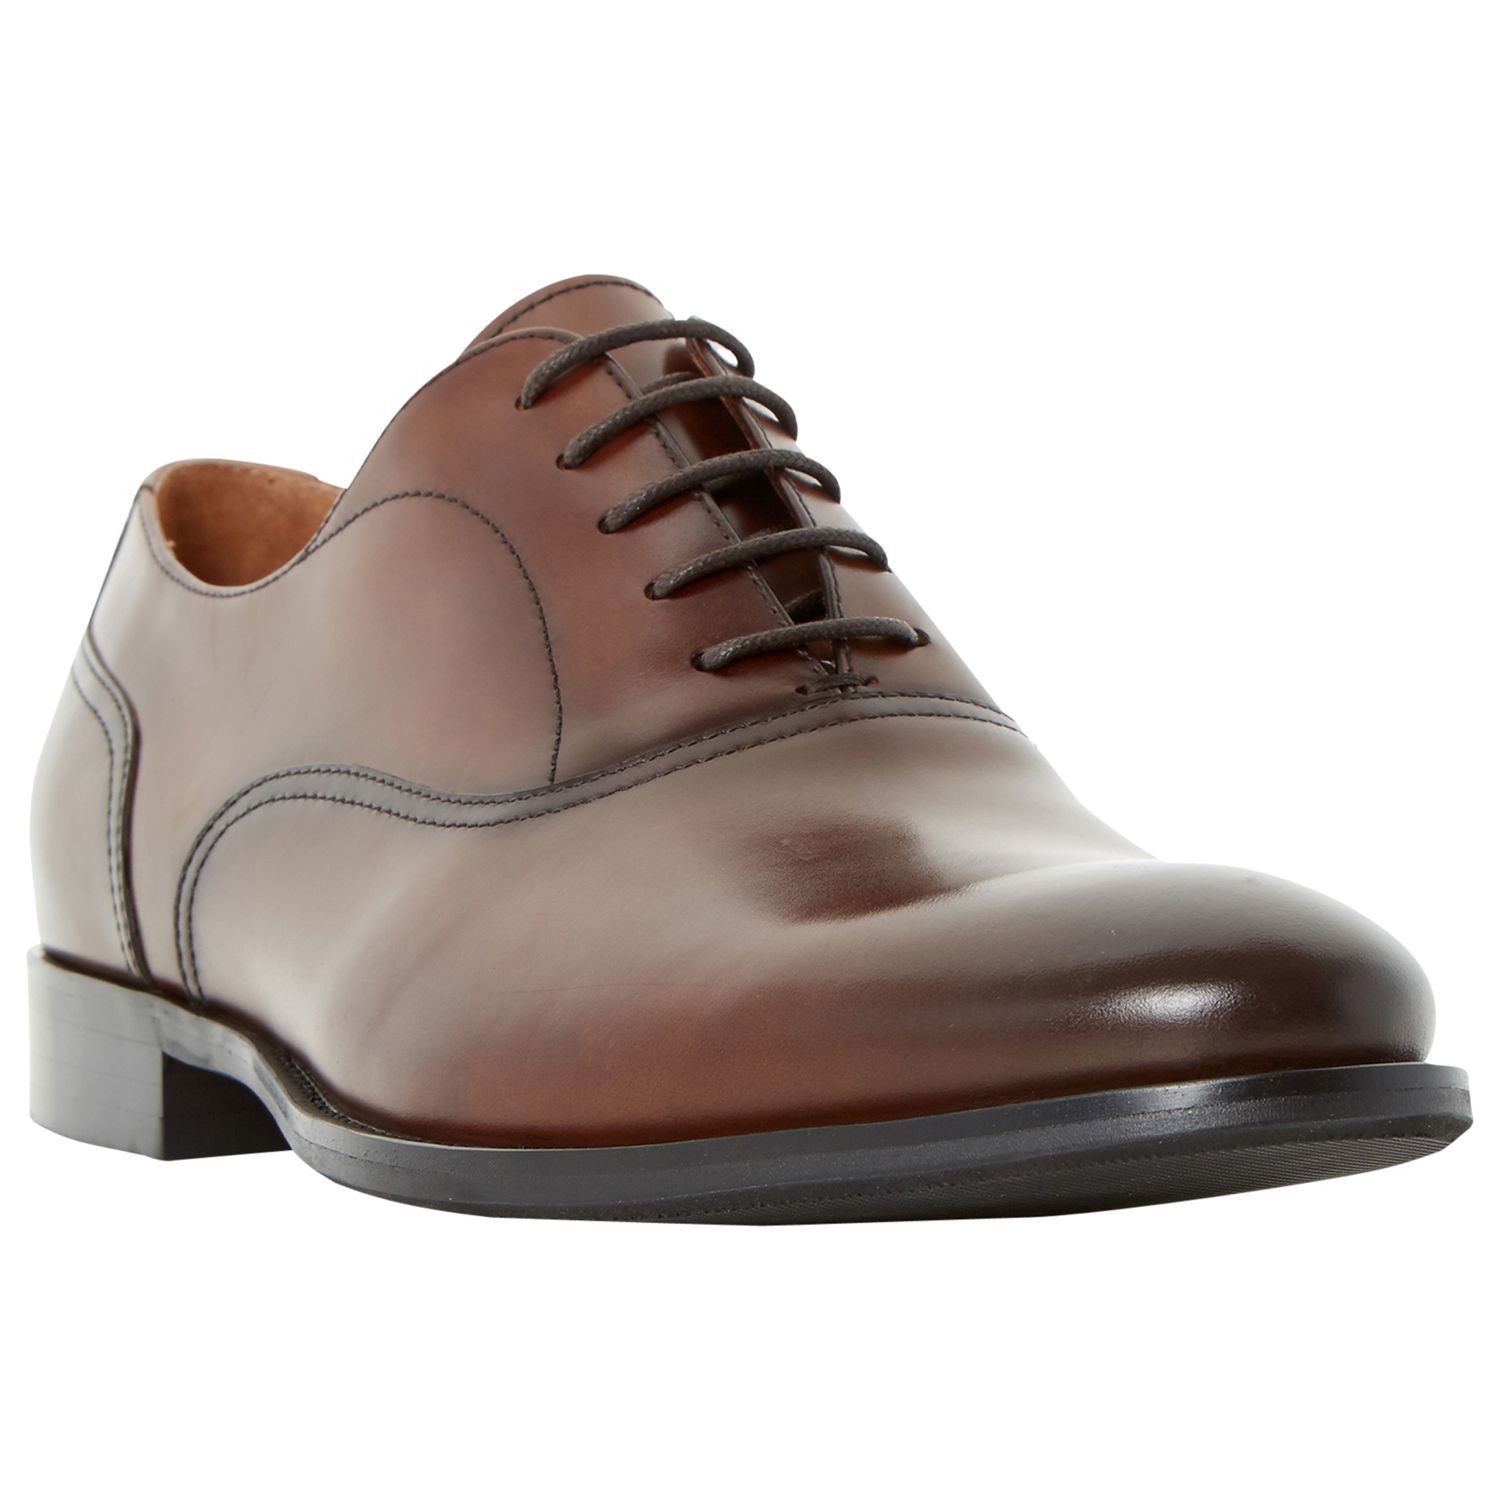 Dune Redcoat Burnished Oxford Shoes, Tan